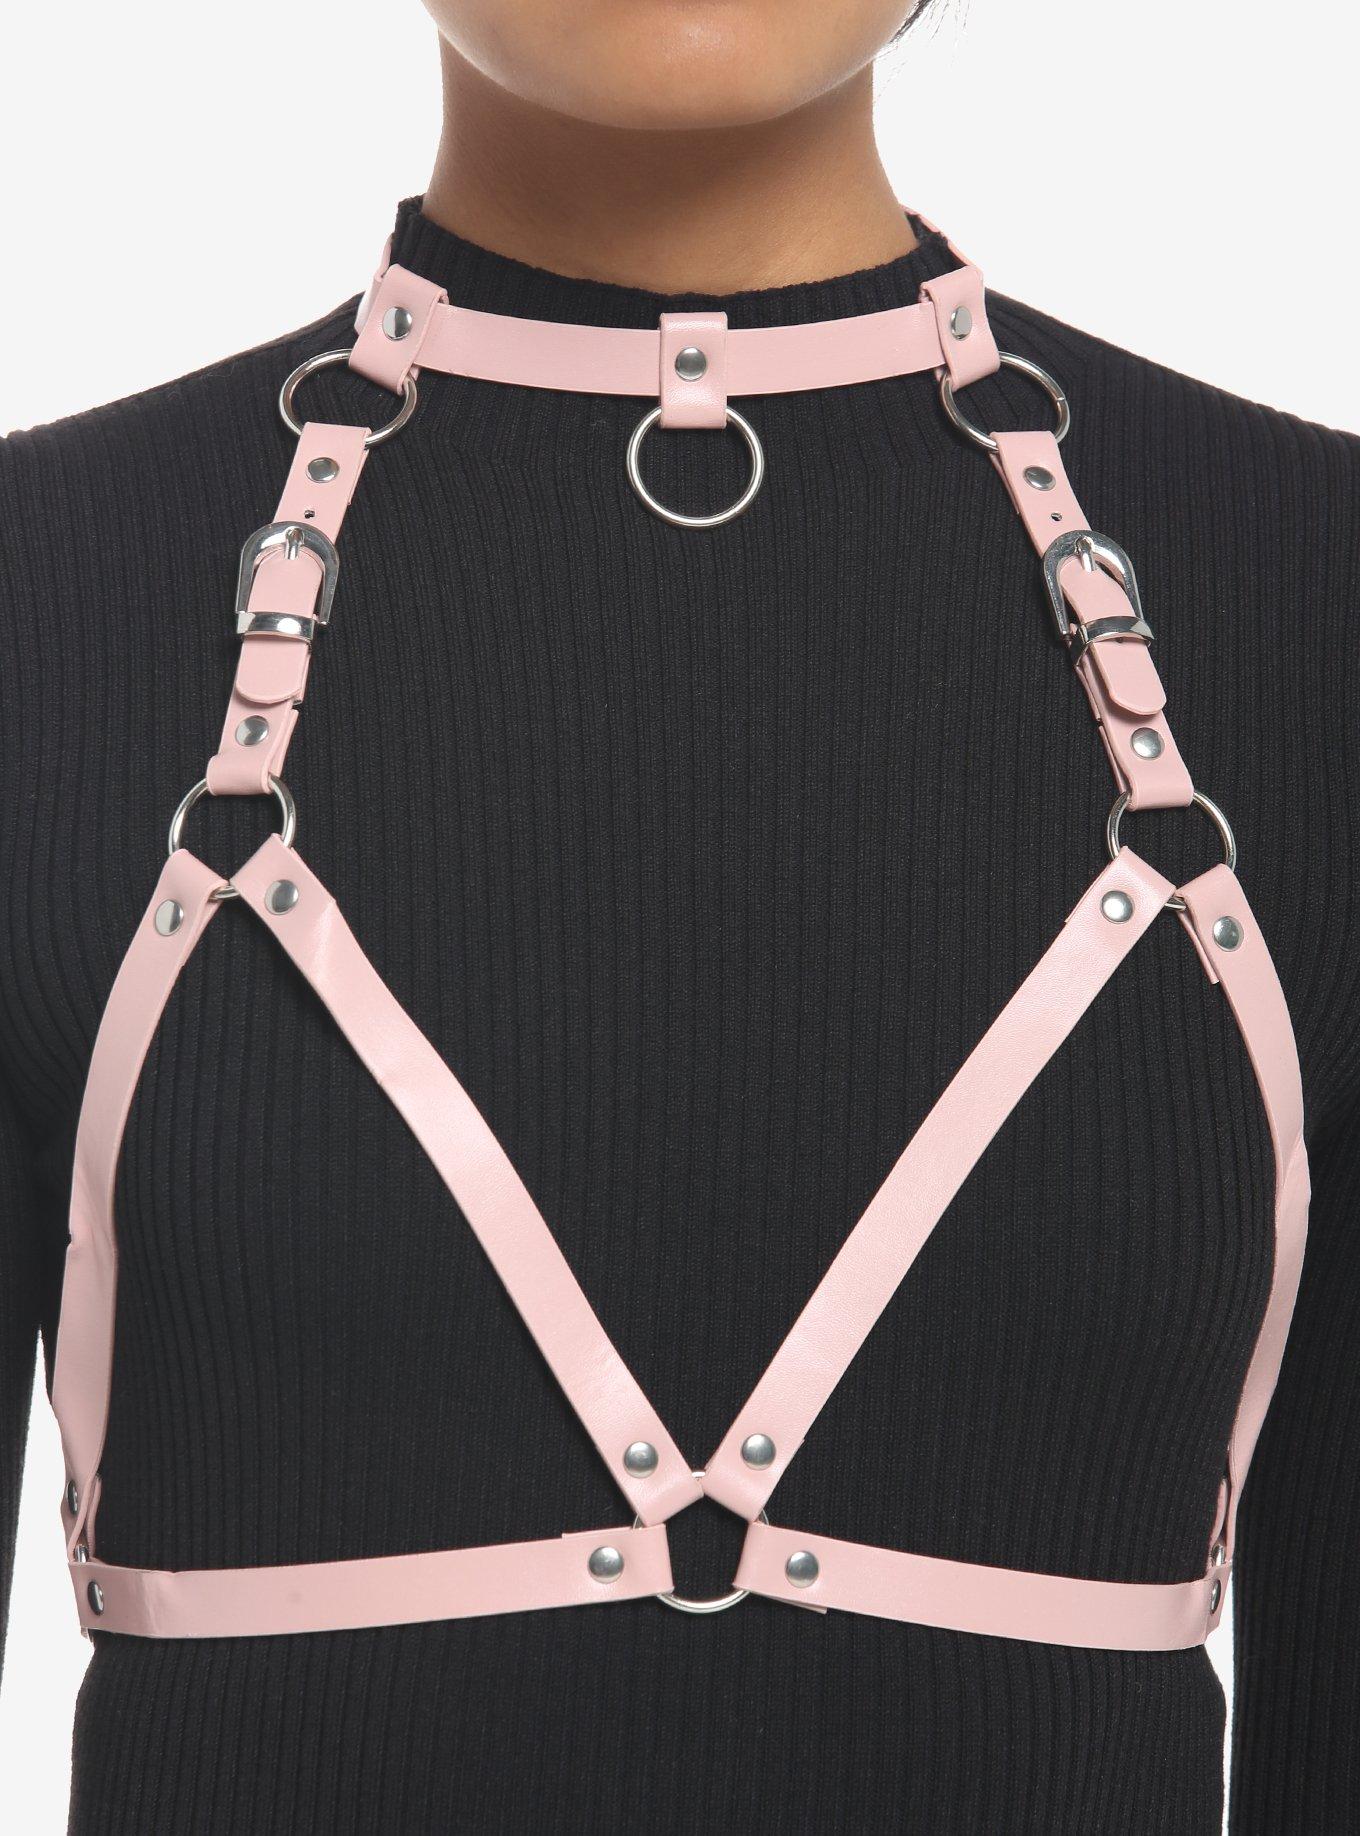 Pink Faux Leather Bra Harness, PINK, hi-res